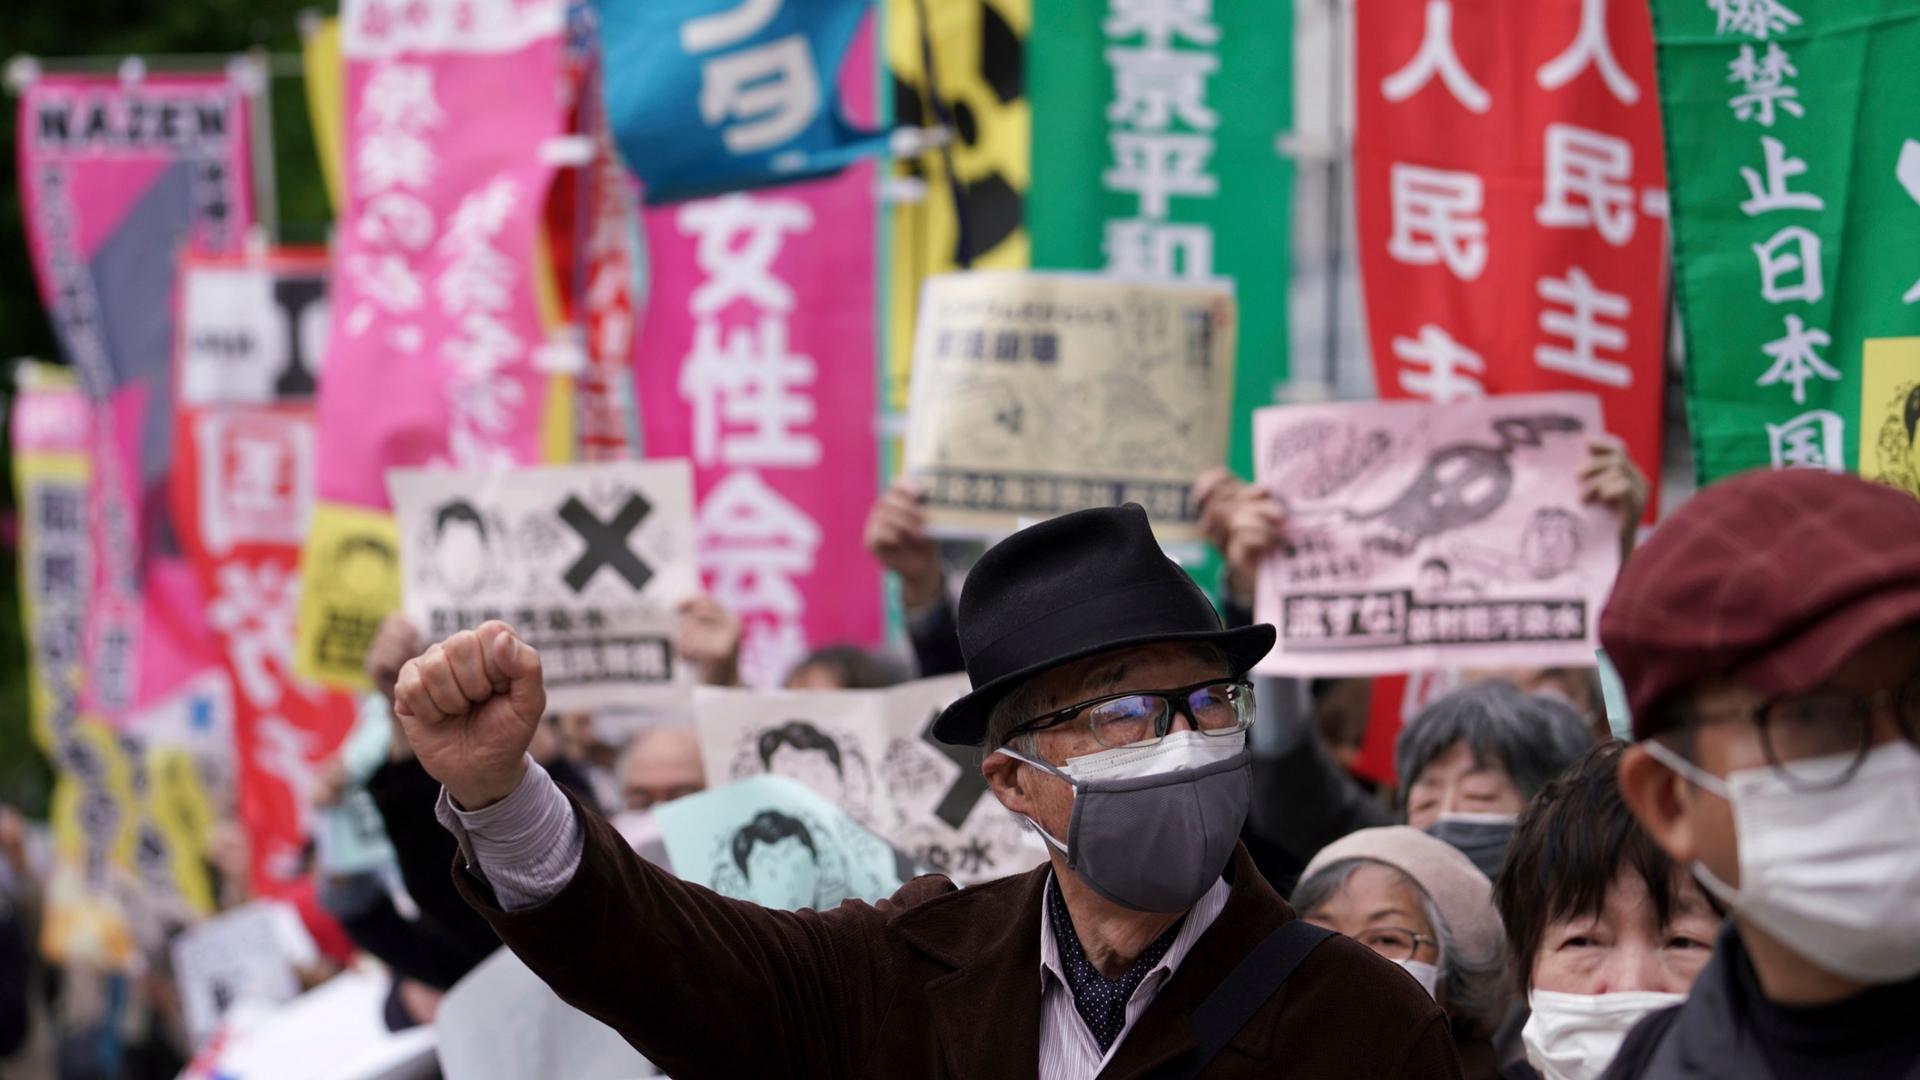 A man is shown among a crowd of protesters wearing a dark jacket, hat and face mask with his right hand in the air.